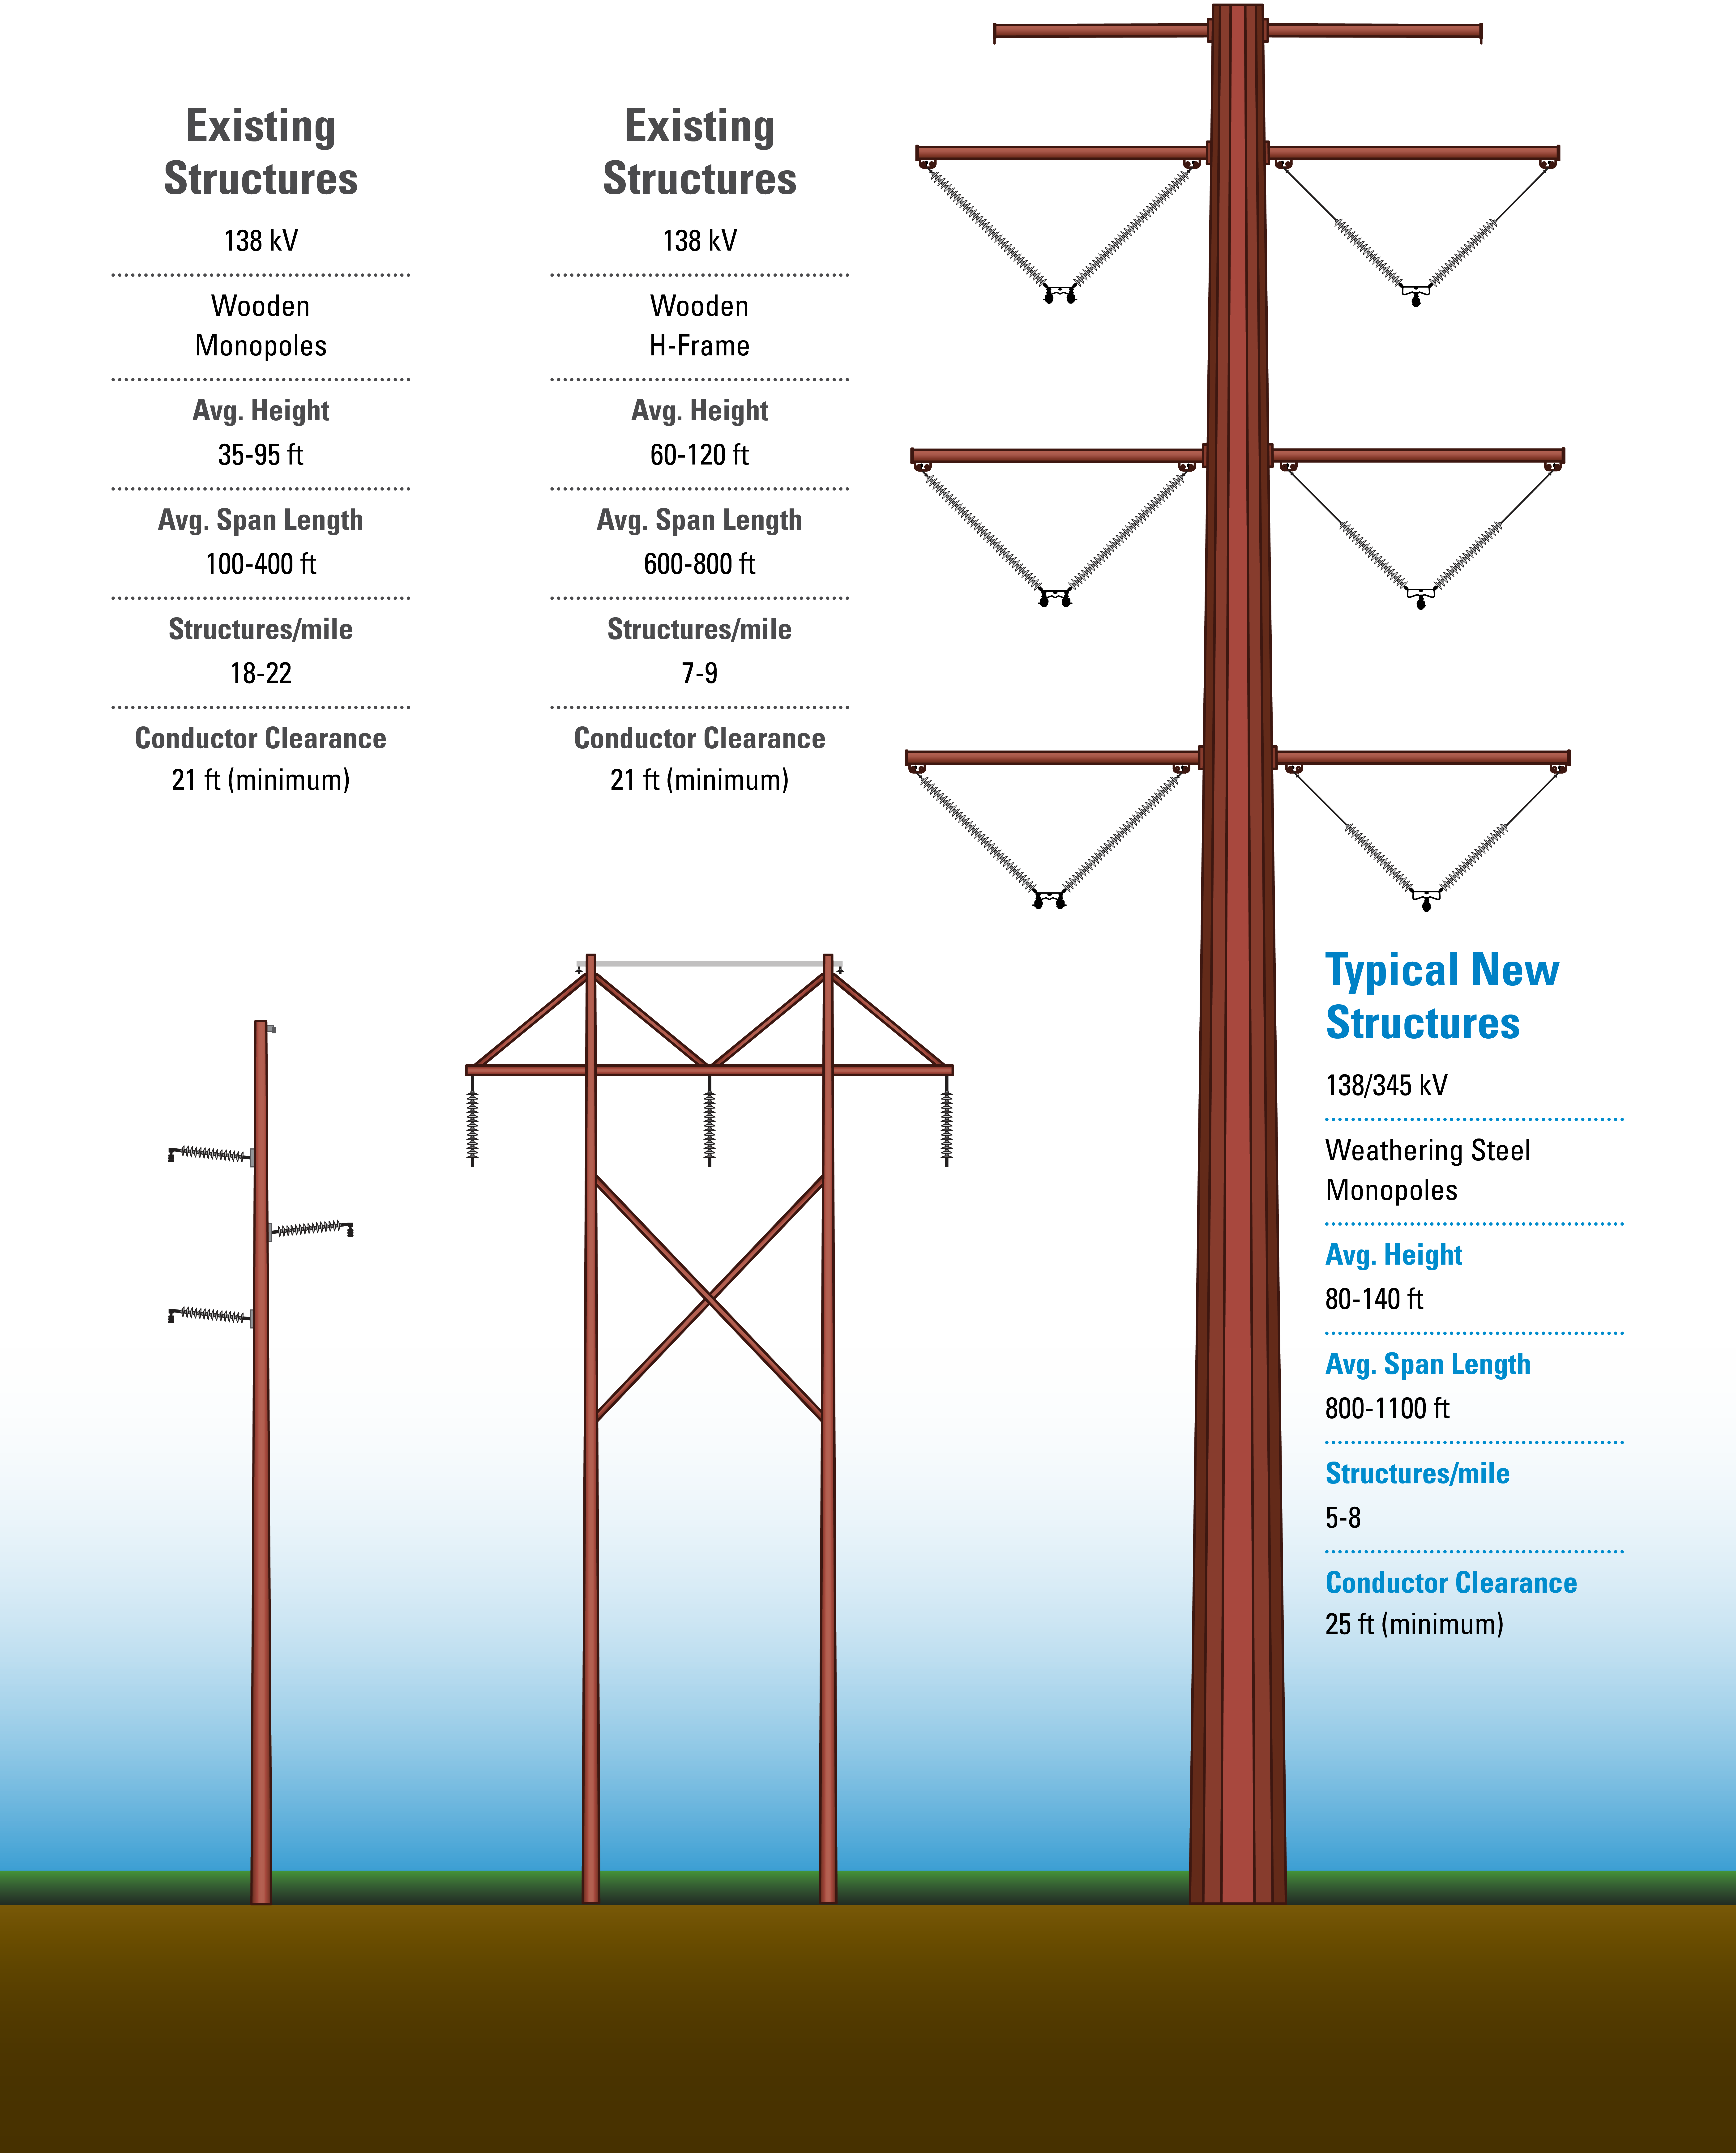 Three side by side structure graphics showing the existing structures and anticipated new structures for the county. Graphics are intended for information purposes only and are not to scale. New structure designs, including number of arms and type of foundation may vary depending on final route, soil conditions, circuit design, and presence of distribution.
                                                  Graphic 1 shows the existing 138 kV wooden monopole, with an average height of 35-95ft and average span length between 100-400ft. Structures per mile averages between 18-22 miles with a conductor clearance of 21ft minimum. 
                                                  
                                                  Graphic 2 shows the existing 138 kV wooden H-frame, with an average height of 60-120ft and average span length between 600-800ft. Structures per mile averages between 7-9 miles with a conductor clearance of 21ft minimum. 
                                                  
                                                  Graphic 3 shows the anticipated new structure as a 138/345 kV weathering steel monopole with an average height of 80-140ft and average span length between 800-1100 ft. Structures per mile averages between 5-8 miles with a conductor clearance of 25ft minimum.